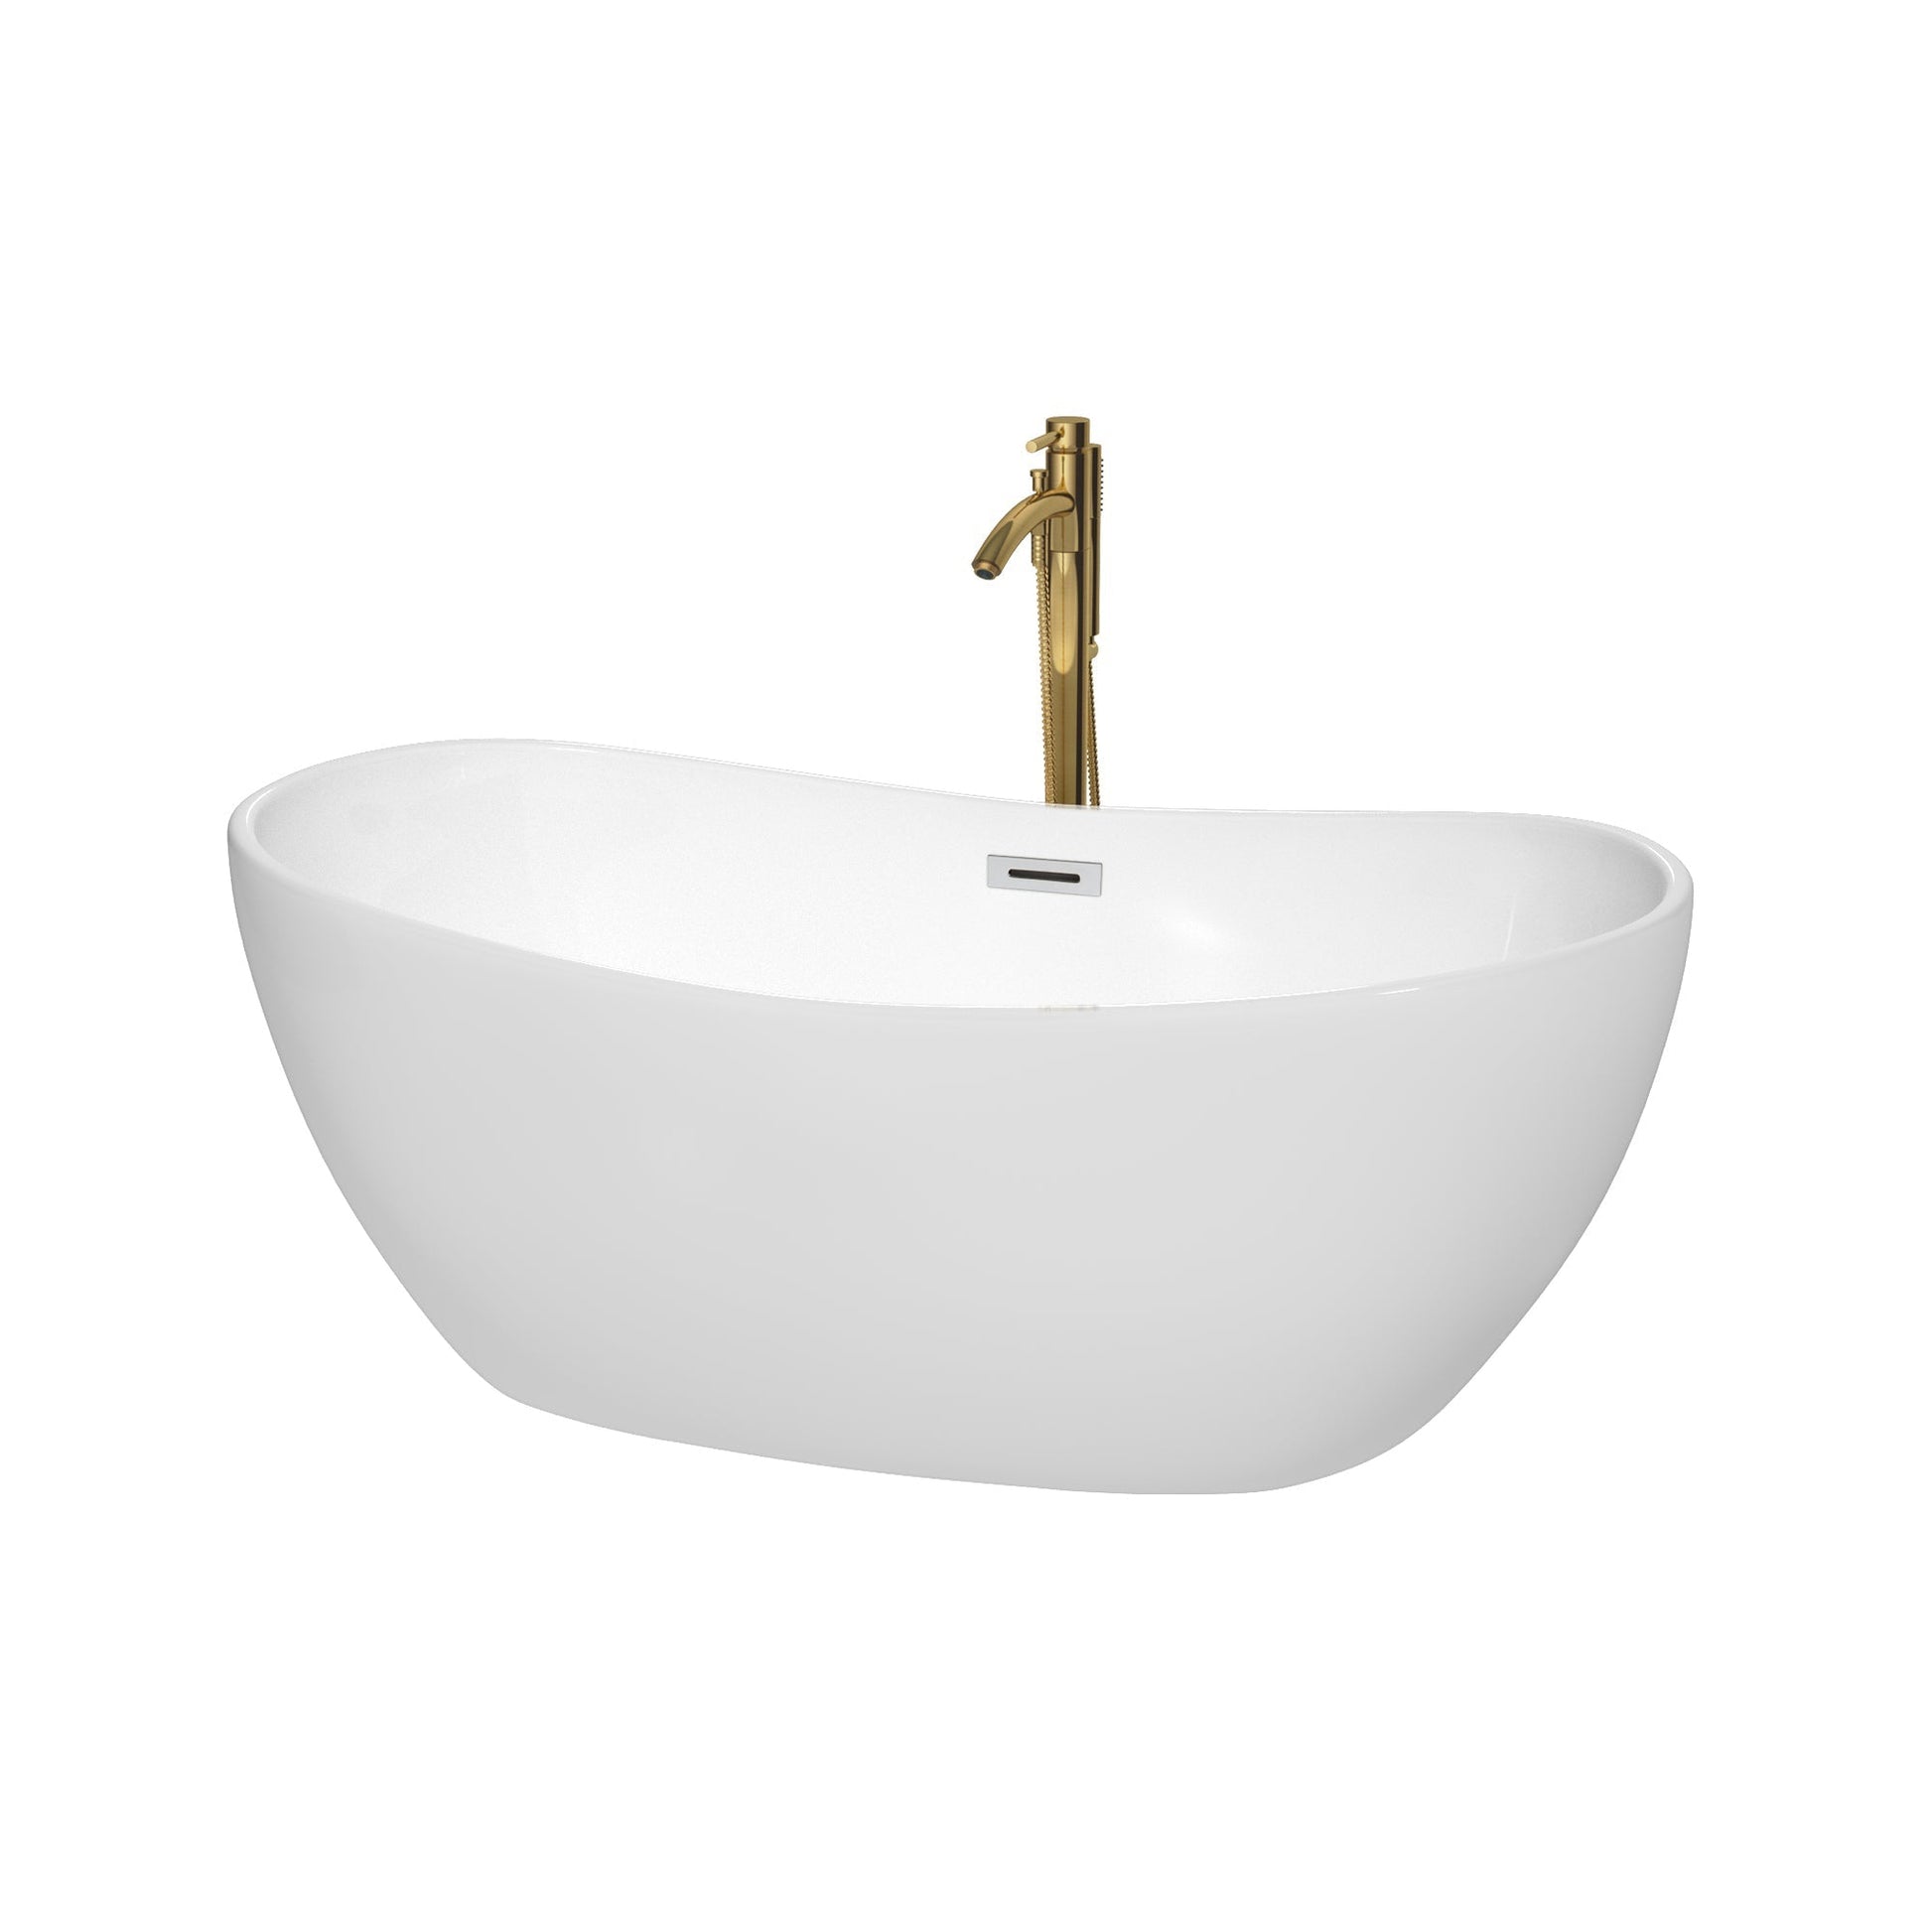 Wyndham Collection Rebecca 60" Freestanding Bathtub in White With Polished Chrome Trim and Floor Mounted Faucet in Brushed Gold